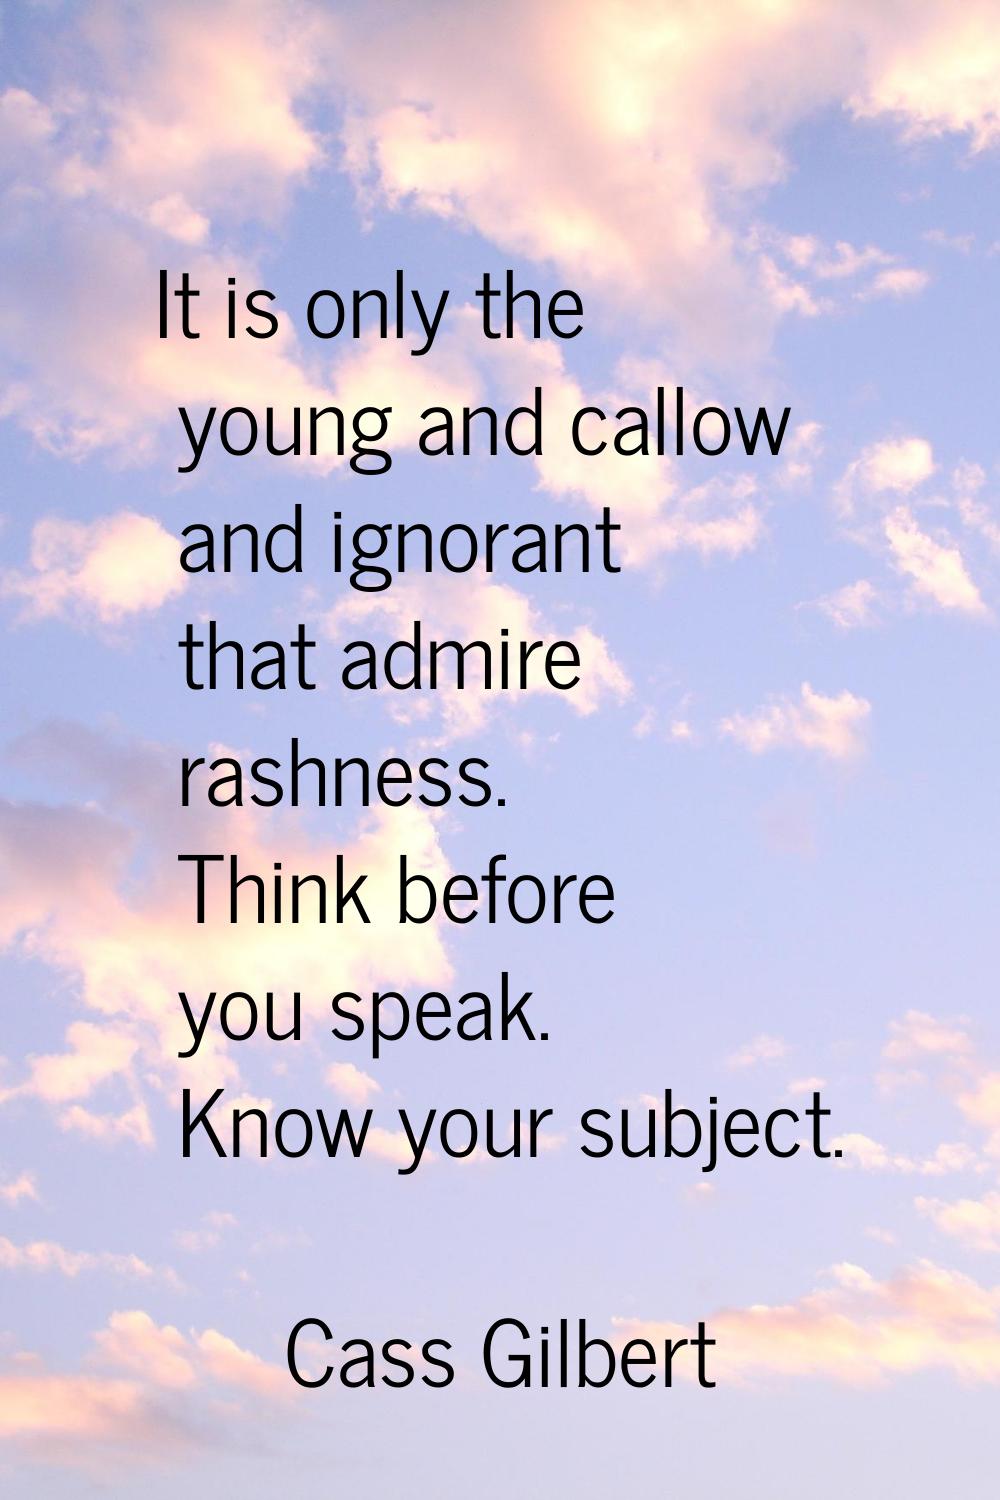 It is only the young and callow and ignorant that admire rashness. Think before you speak. Know you